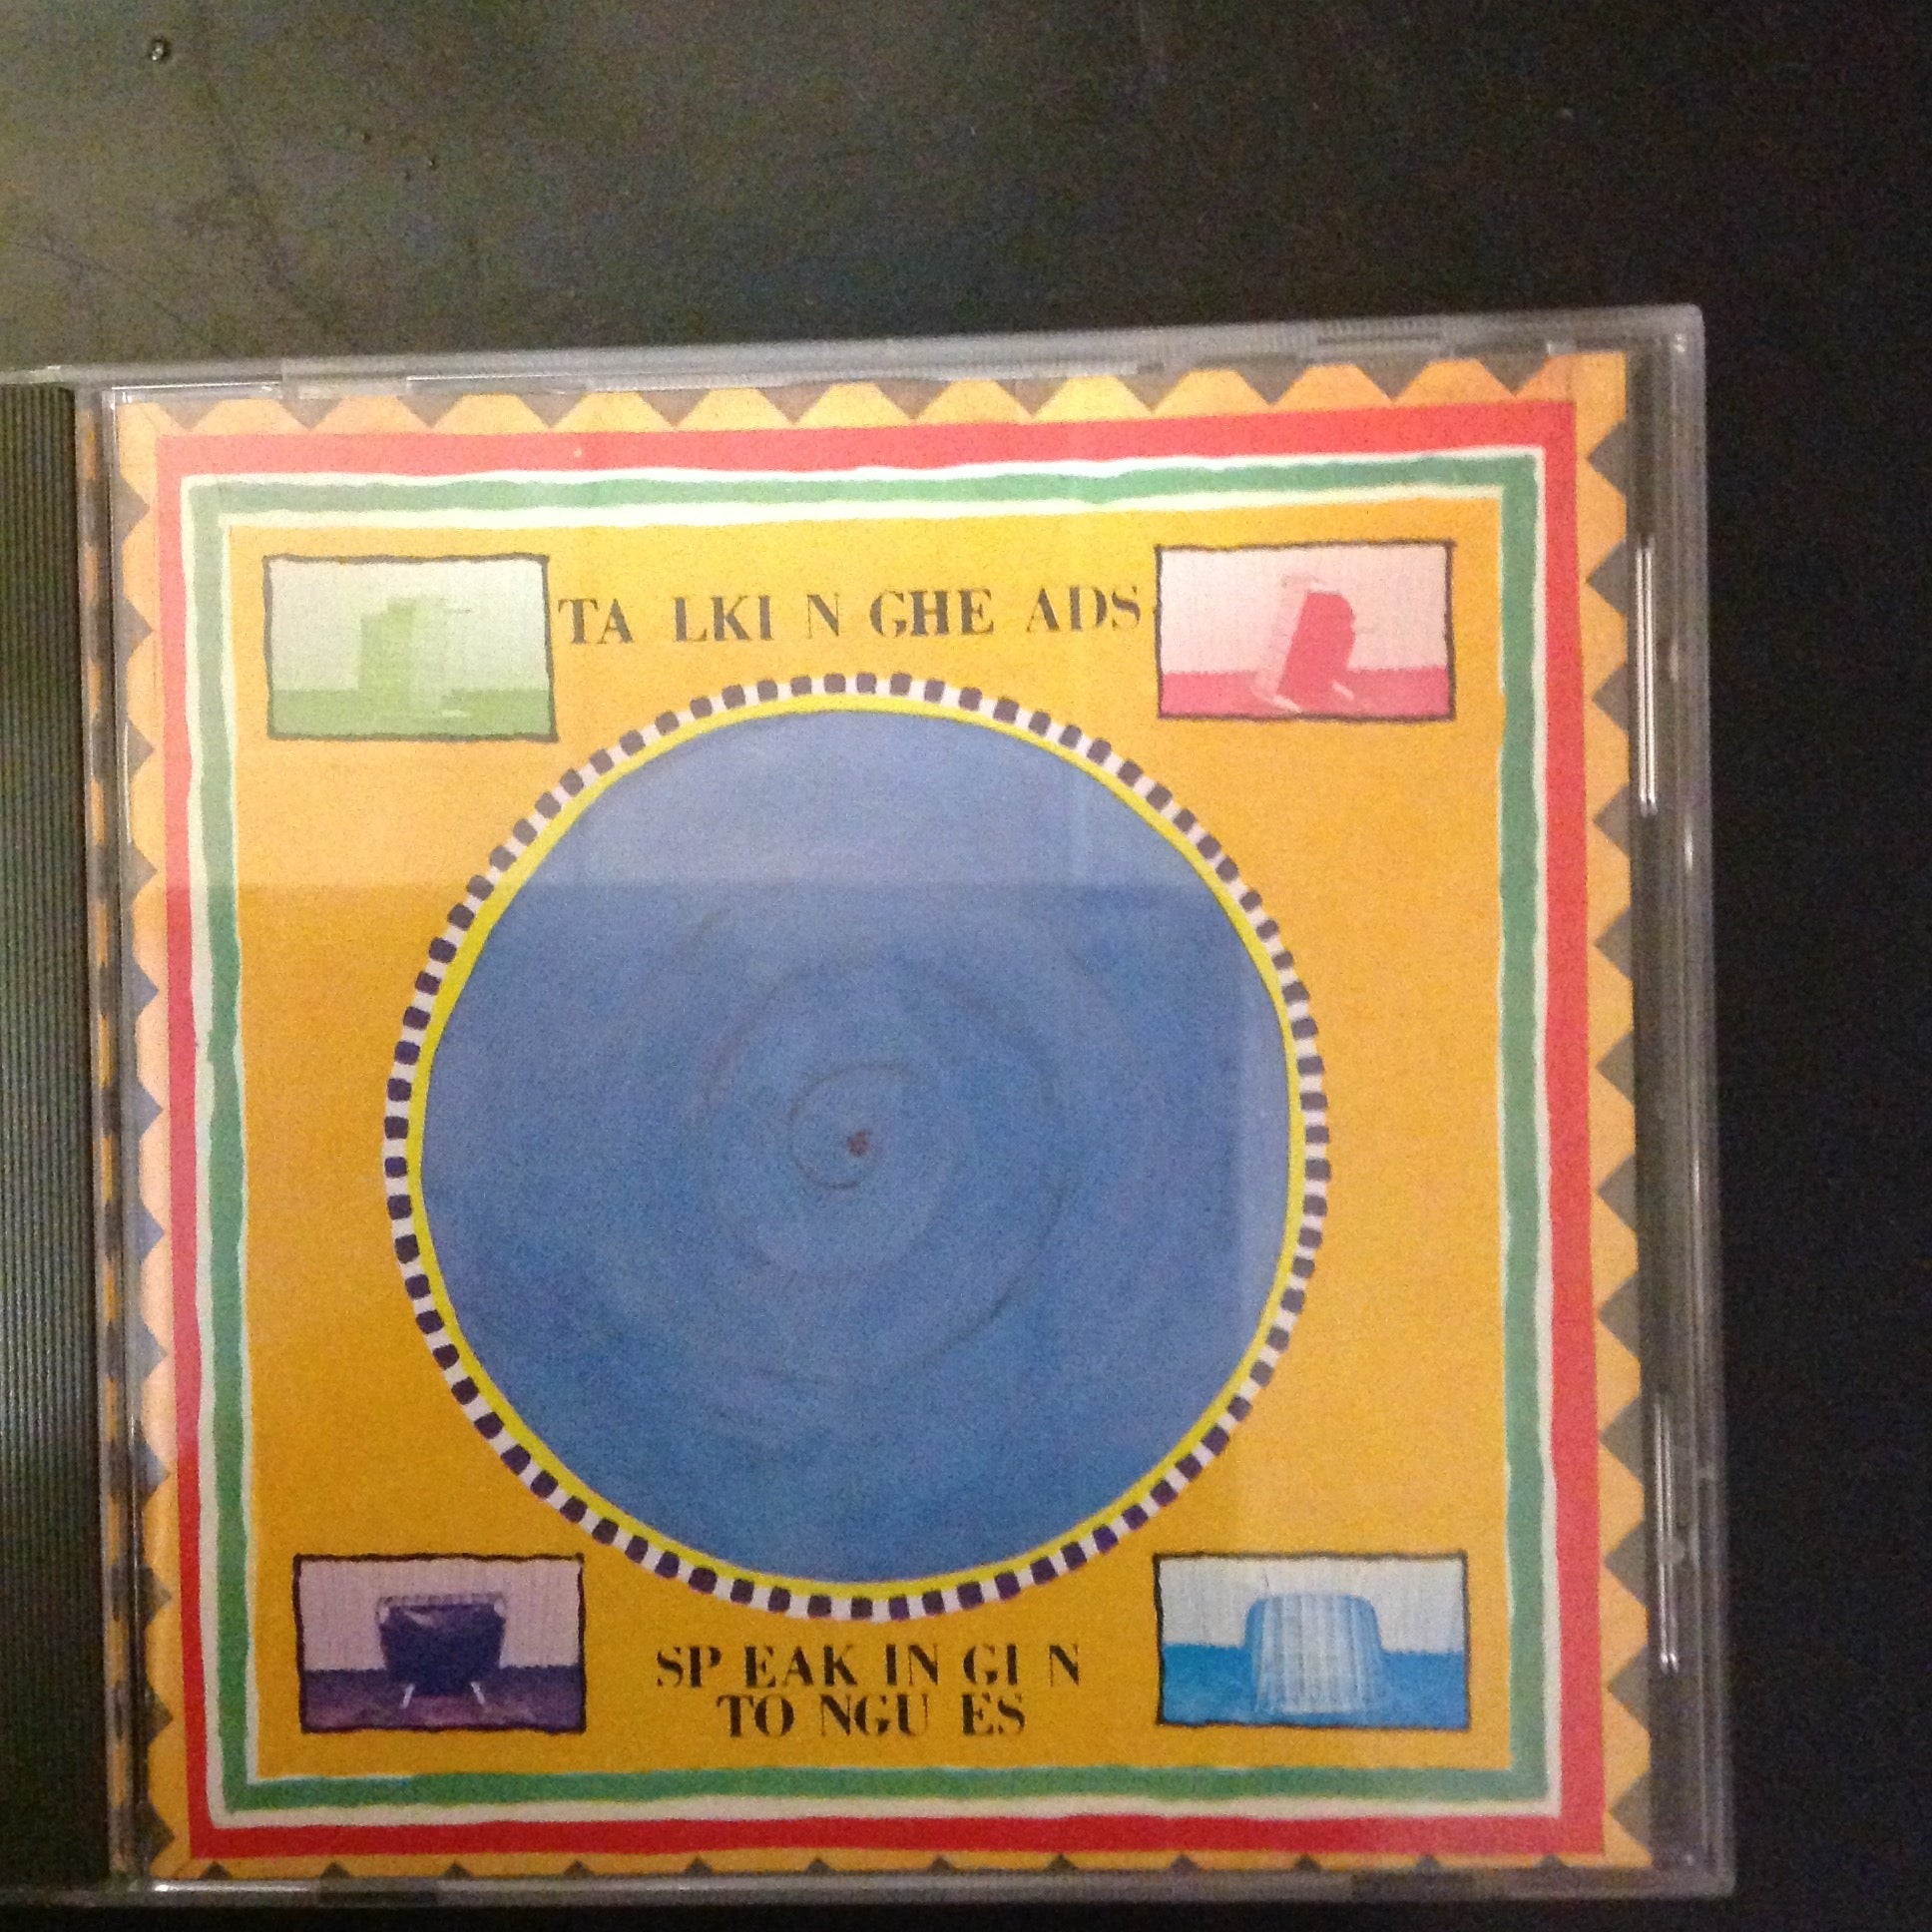 CD Talking Heads Speaking In Tongues Sire 923883-2